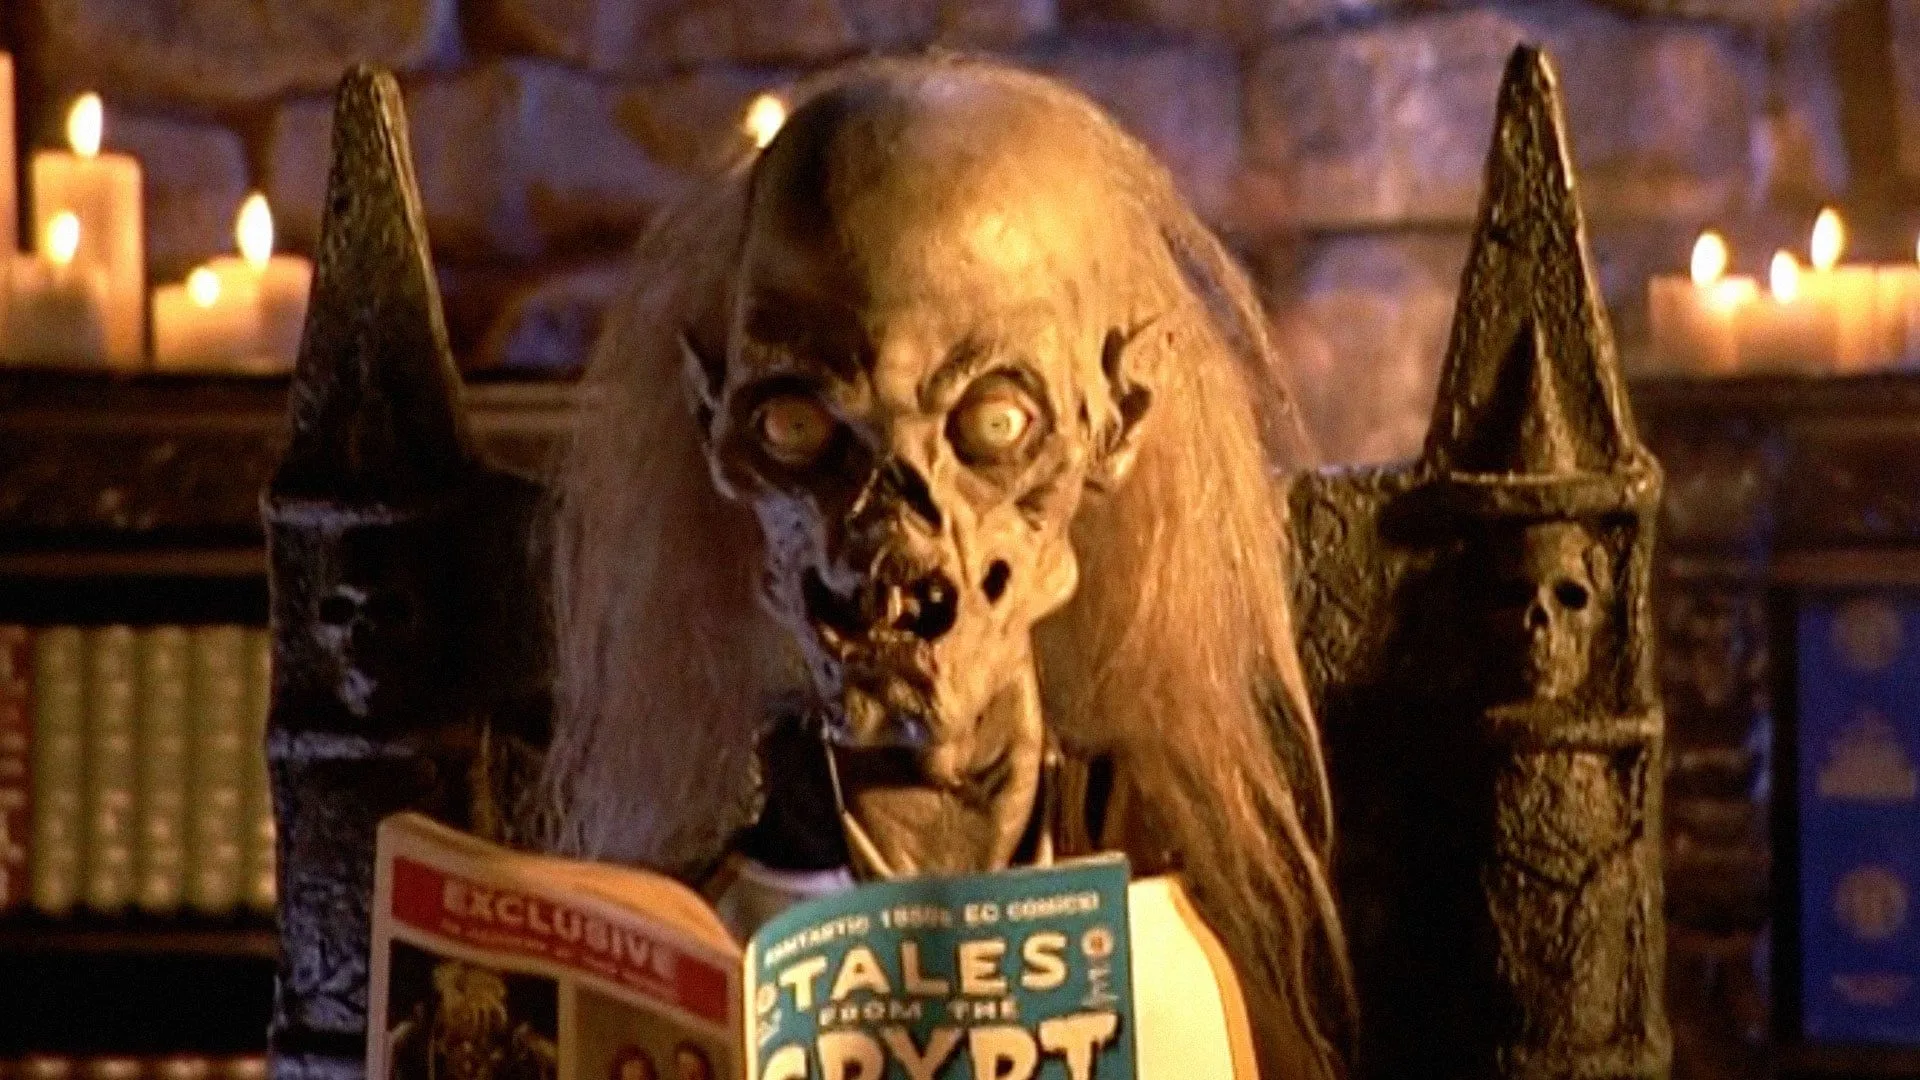 A skeletal Cryptkeeper reads from an EC comic book in 'Tales From the Crypt.'